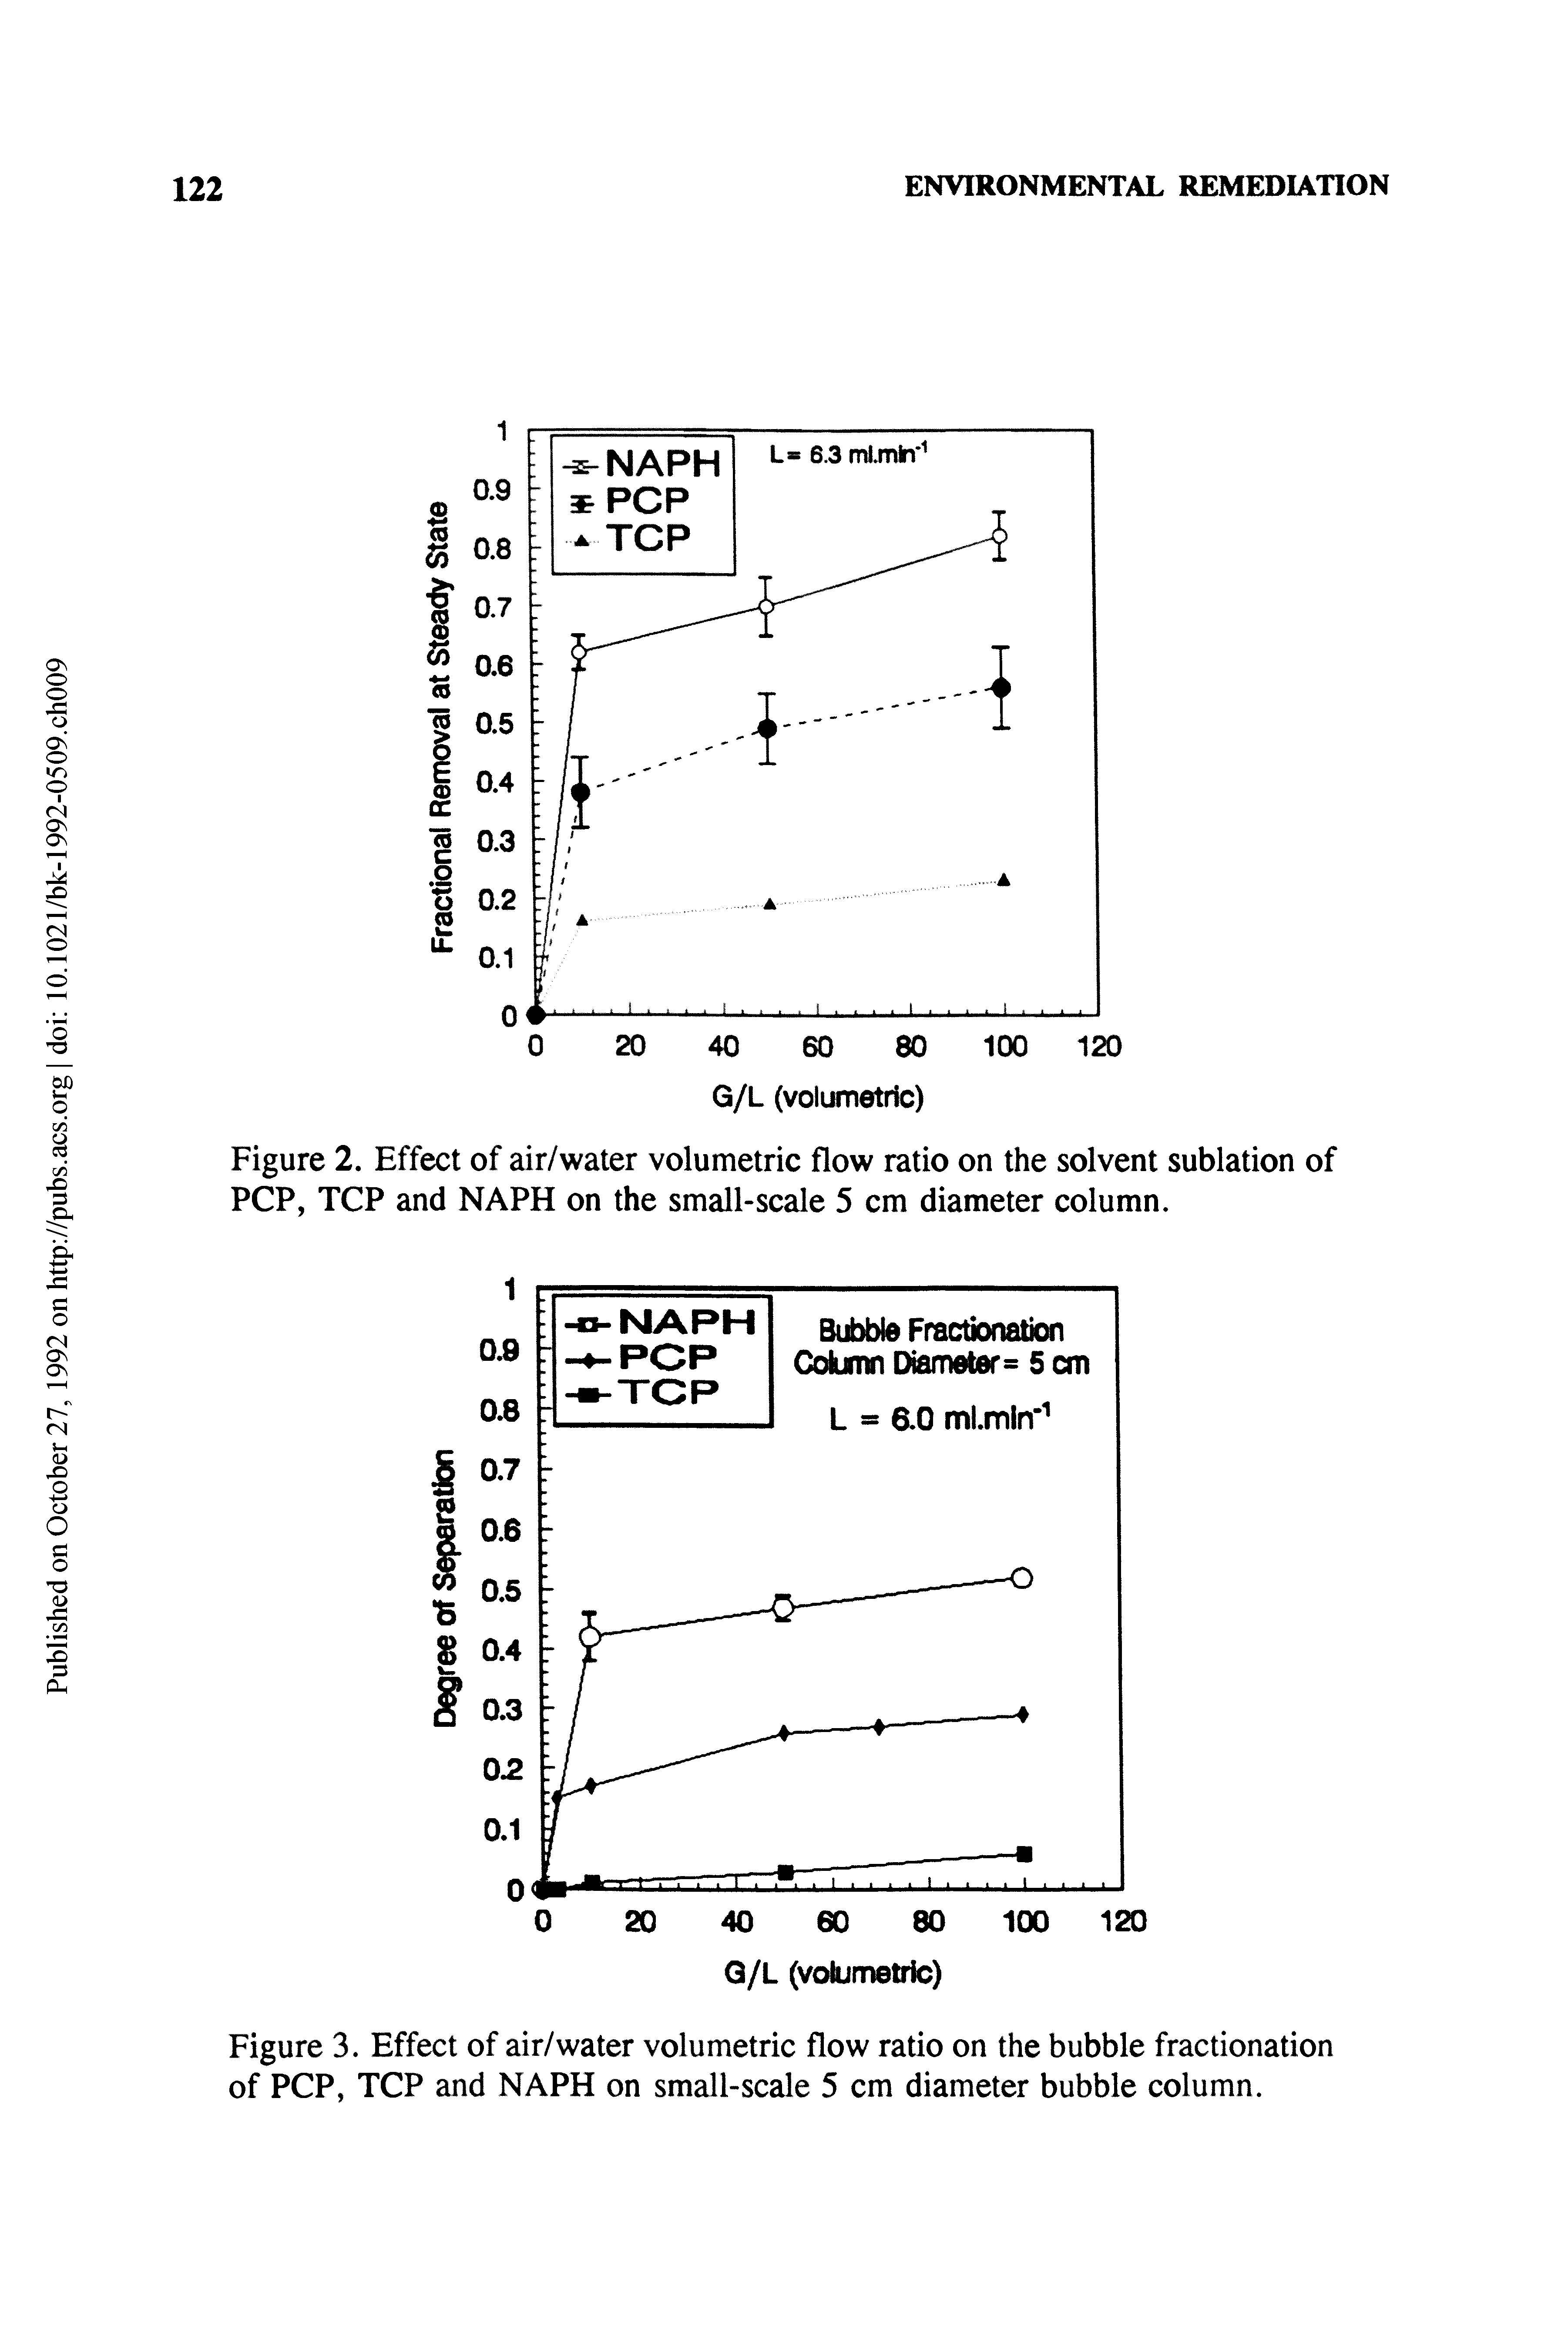 Figure 2. Effect of air/water volumetric flow ratio on the solvent sublation of PCP, TCP and NAPH on the small-scale 5 cm diameter column.